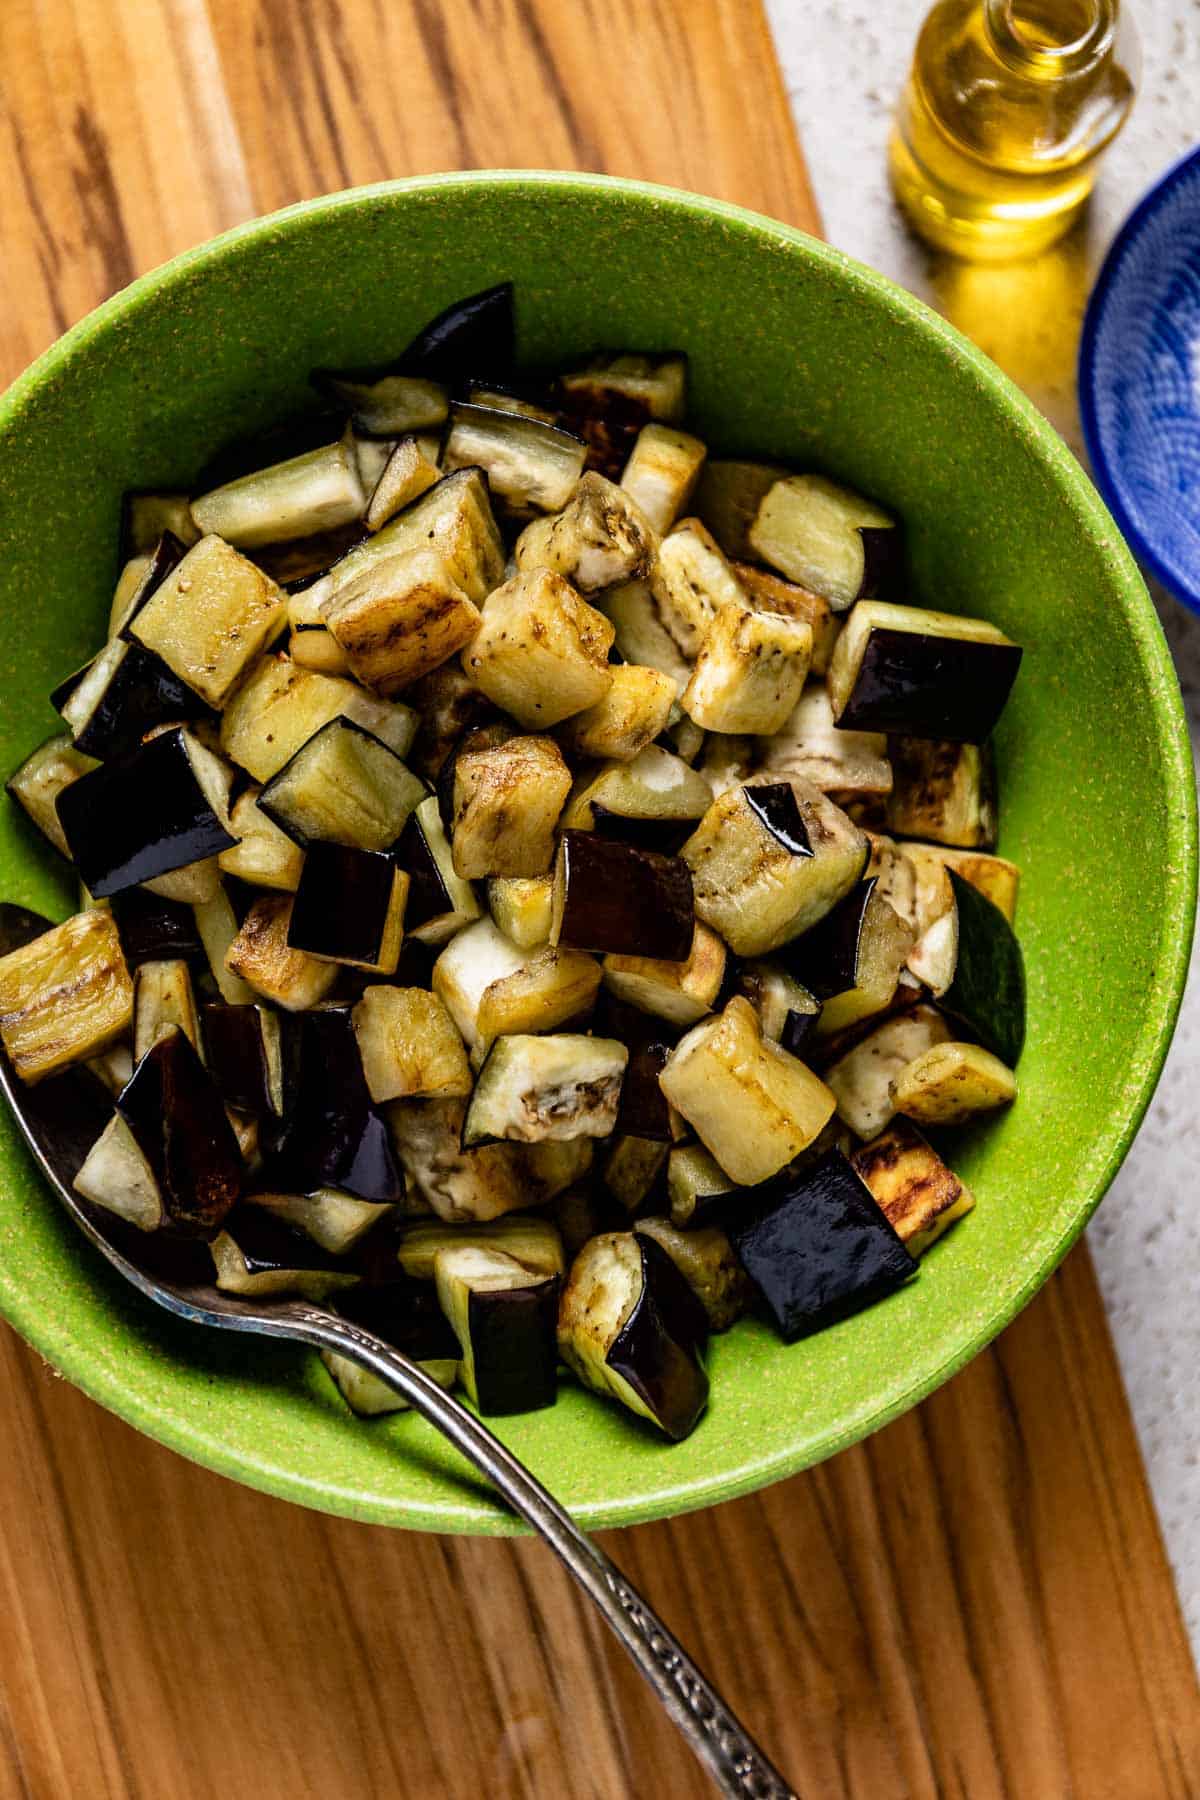 Sauteed eggplant cubes in a plate from the top view.